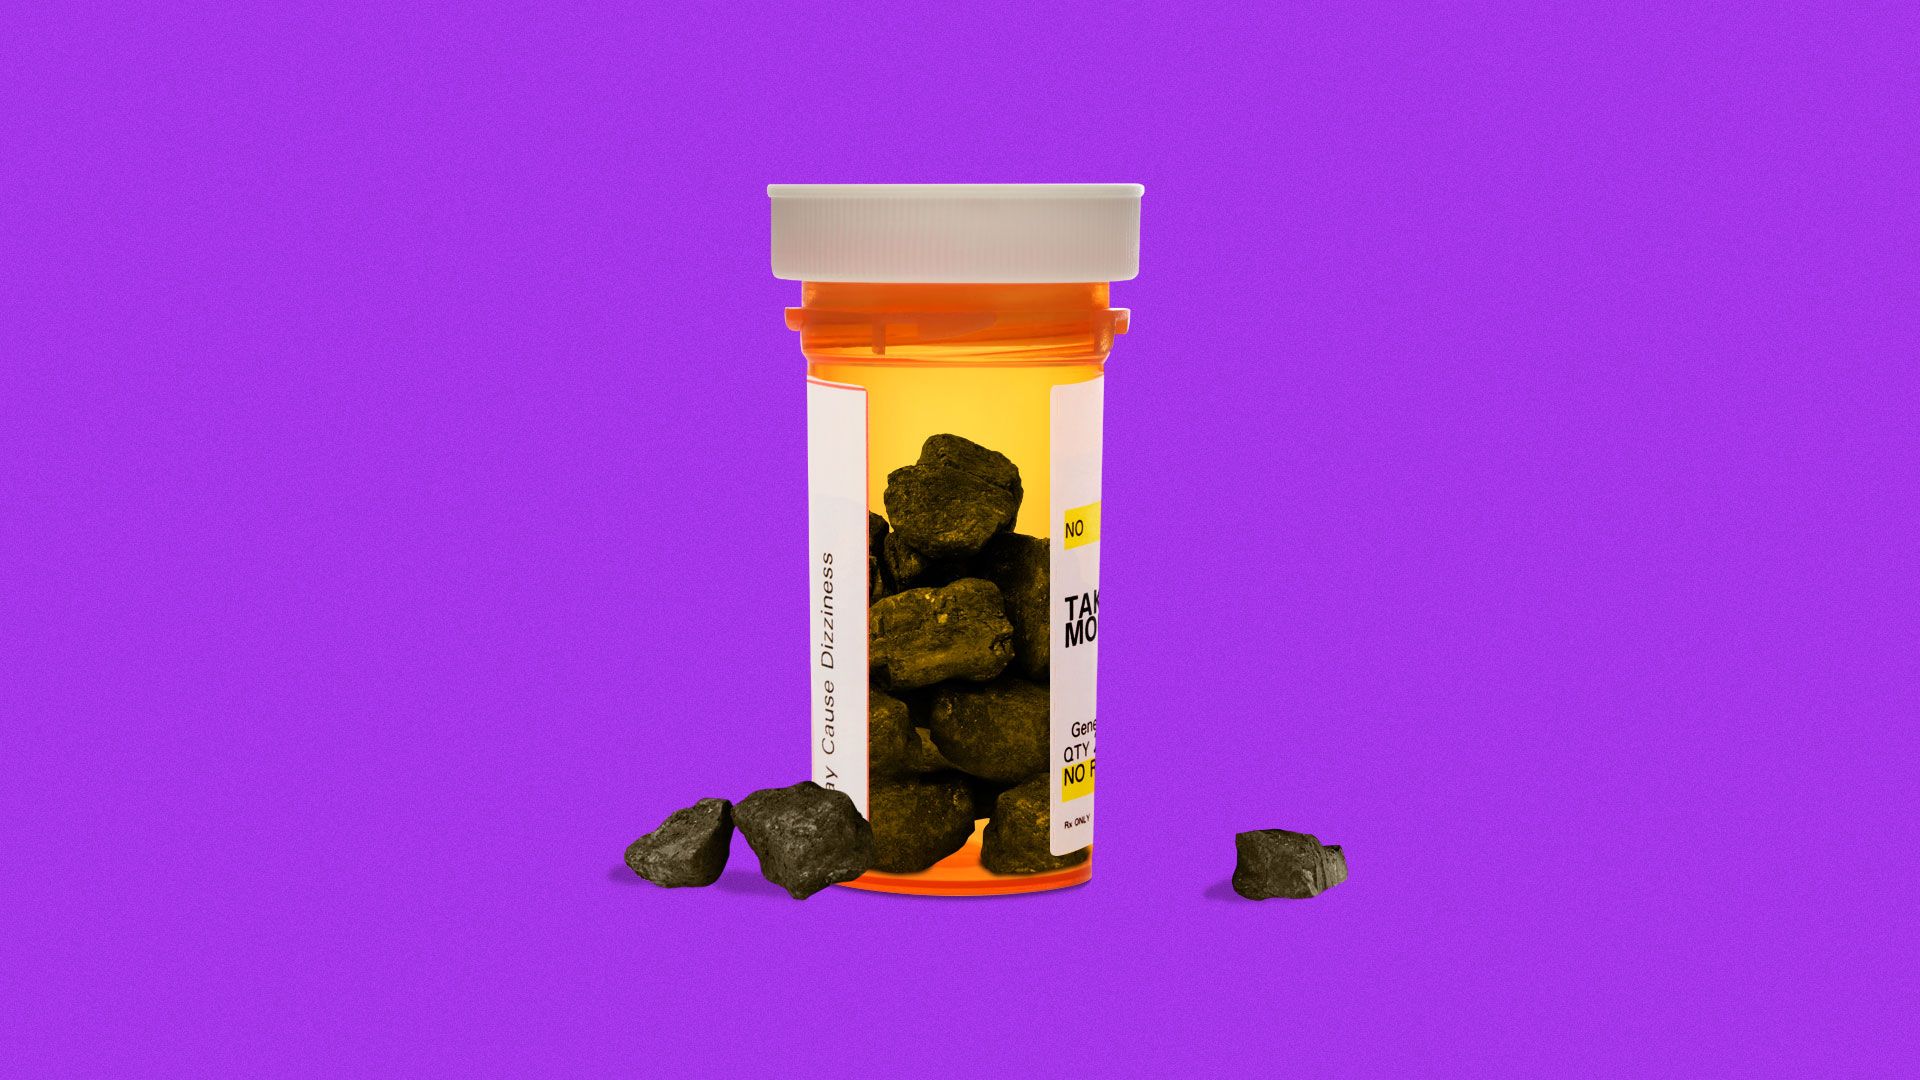 Illustration of lumps of coal in a pill bottle.